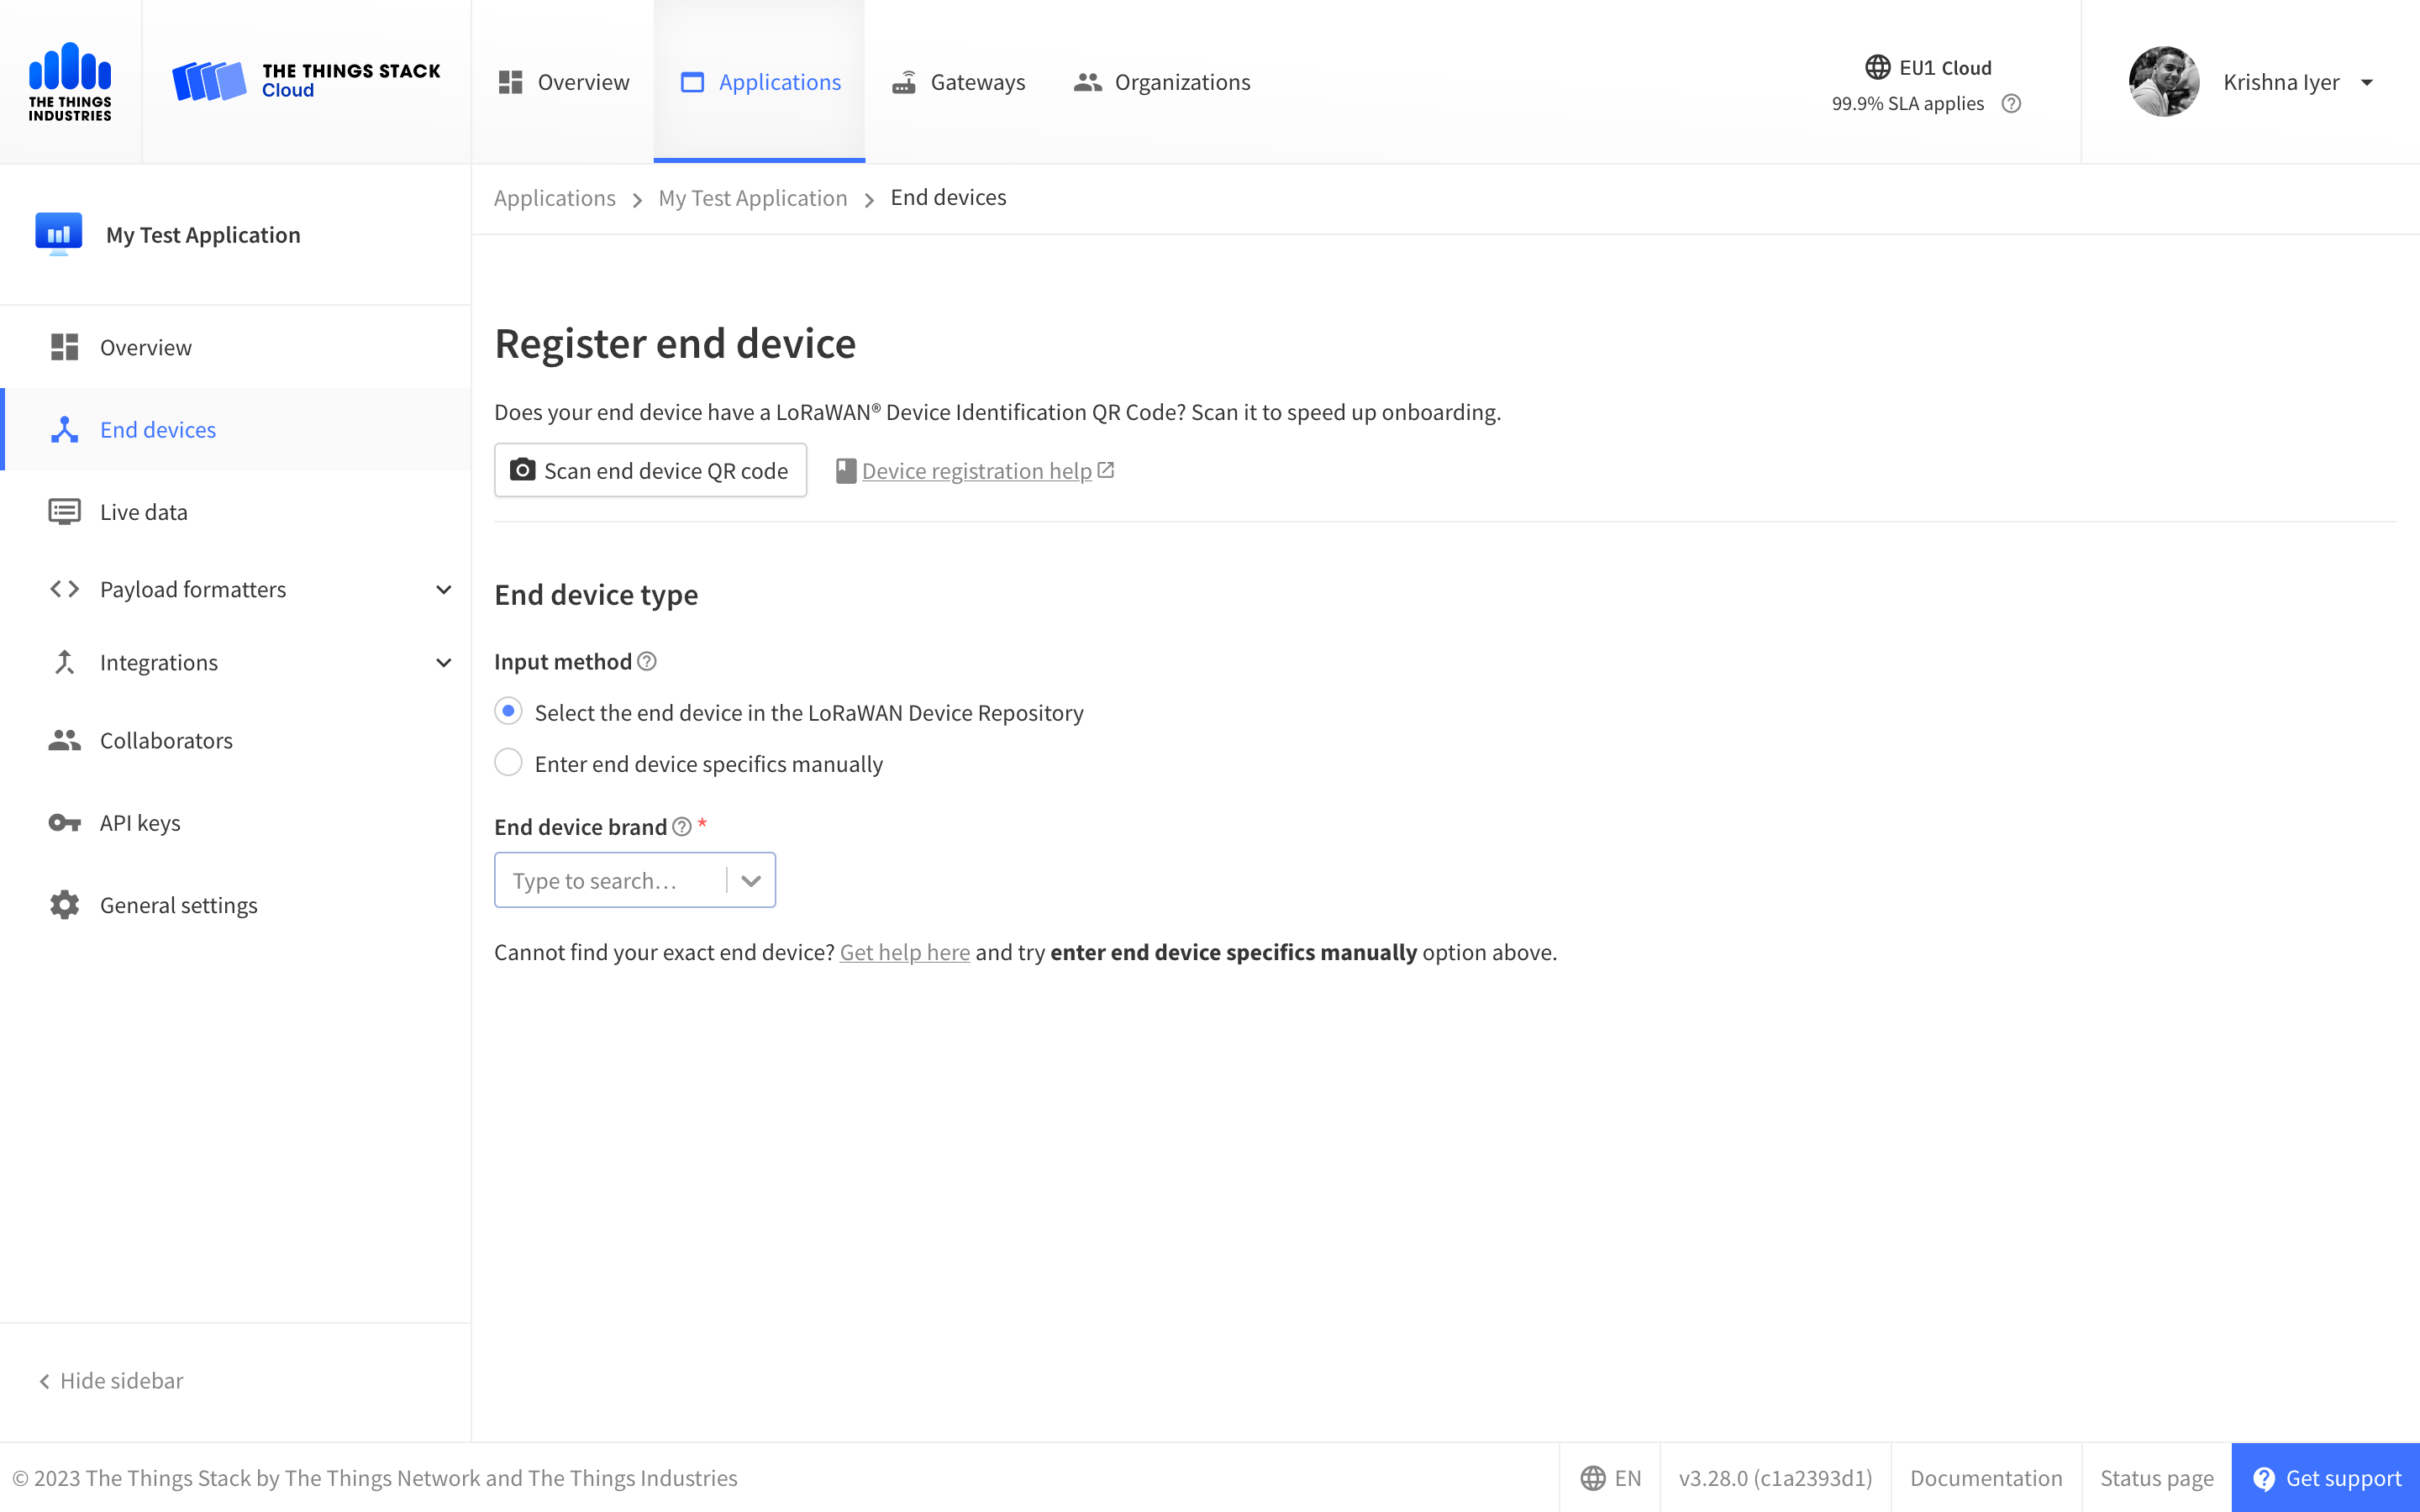 Options to register devices